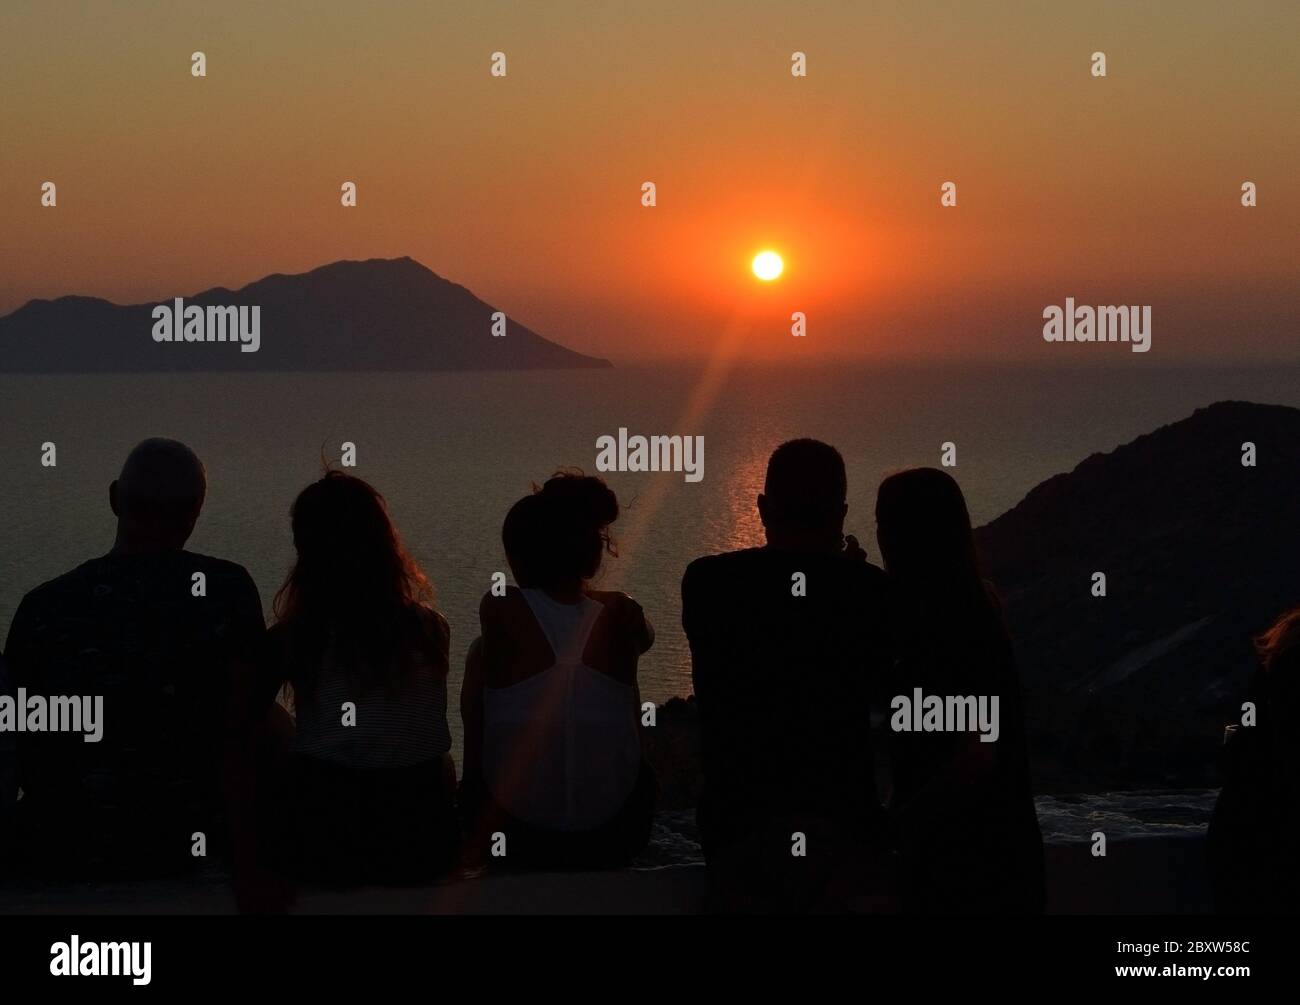 People silhouettes at sunset Stock Photo - Alamy